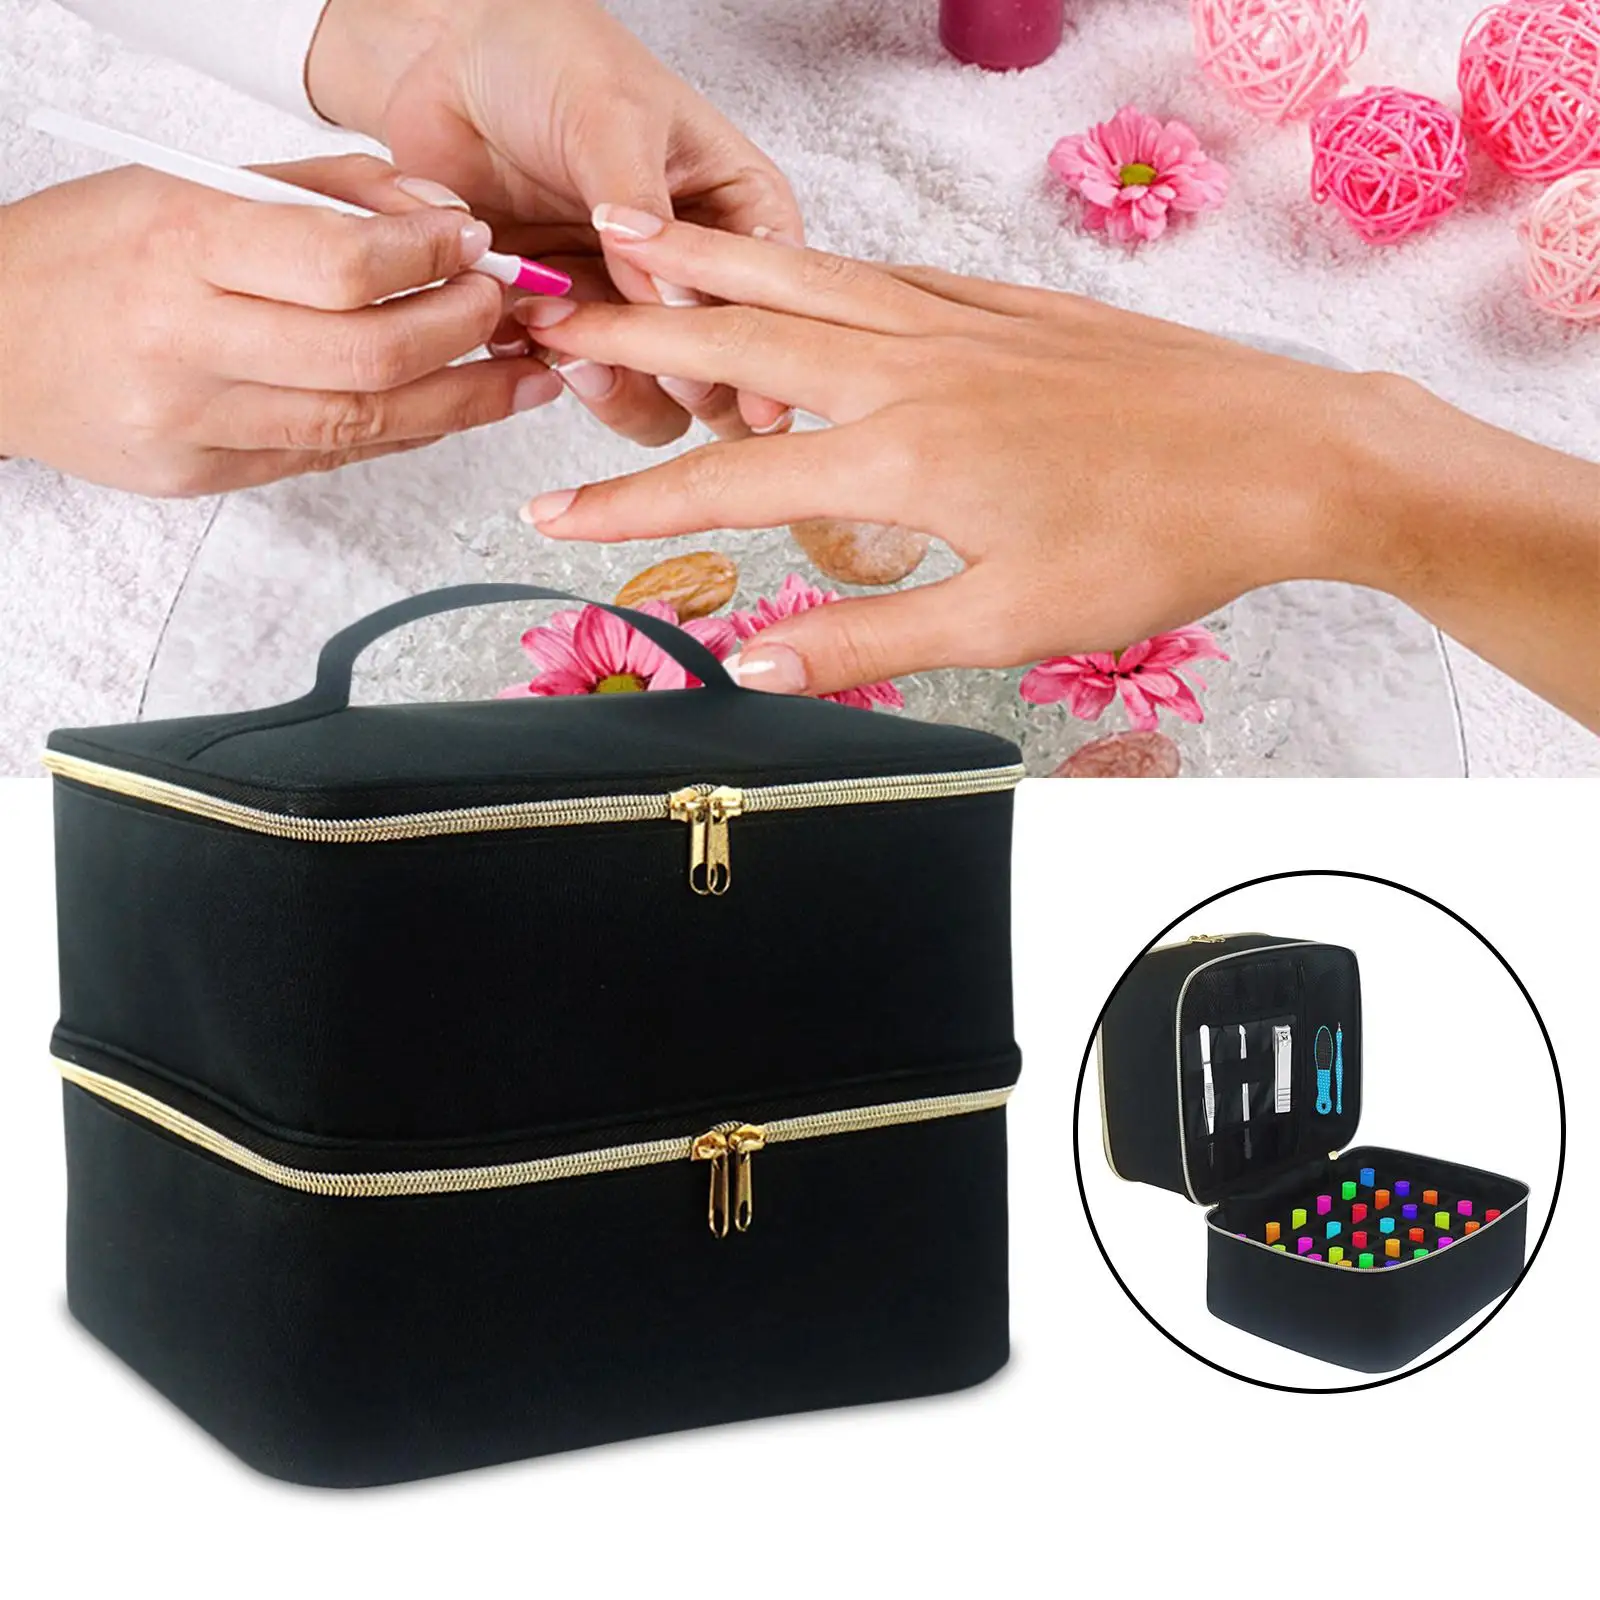 Nail Polish Carrying Case Detachable with Handles Cosmetic Organizer Nail Dryer Case Bag for Manicure Accessories Nail Art Tools